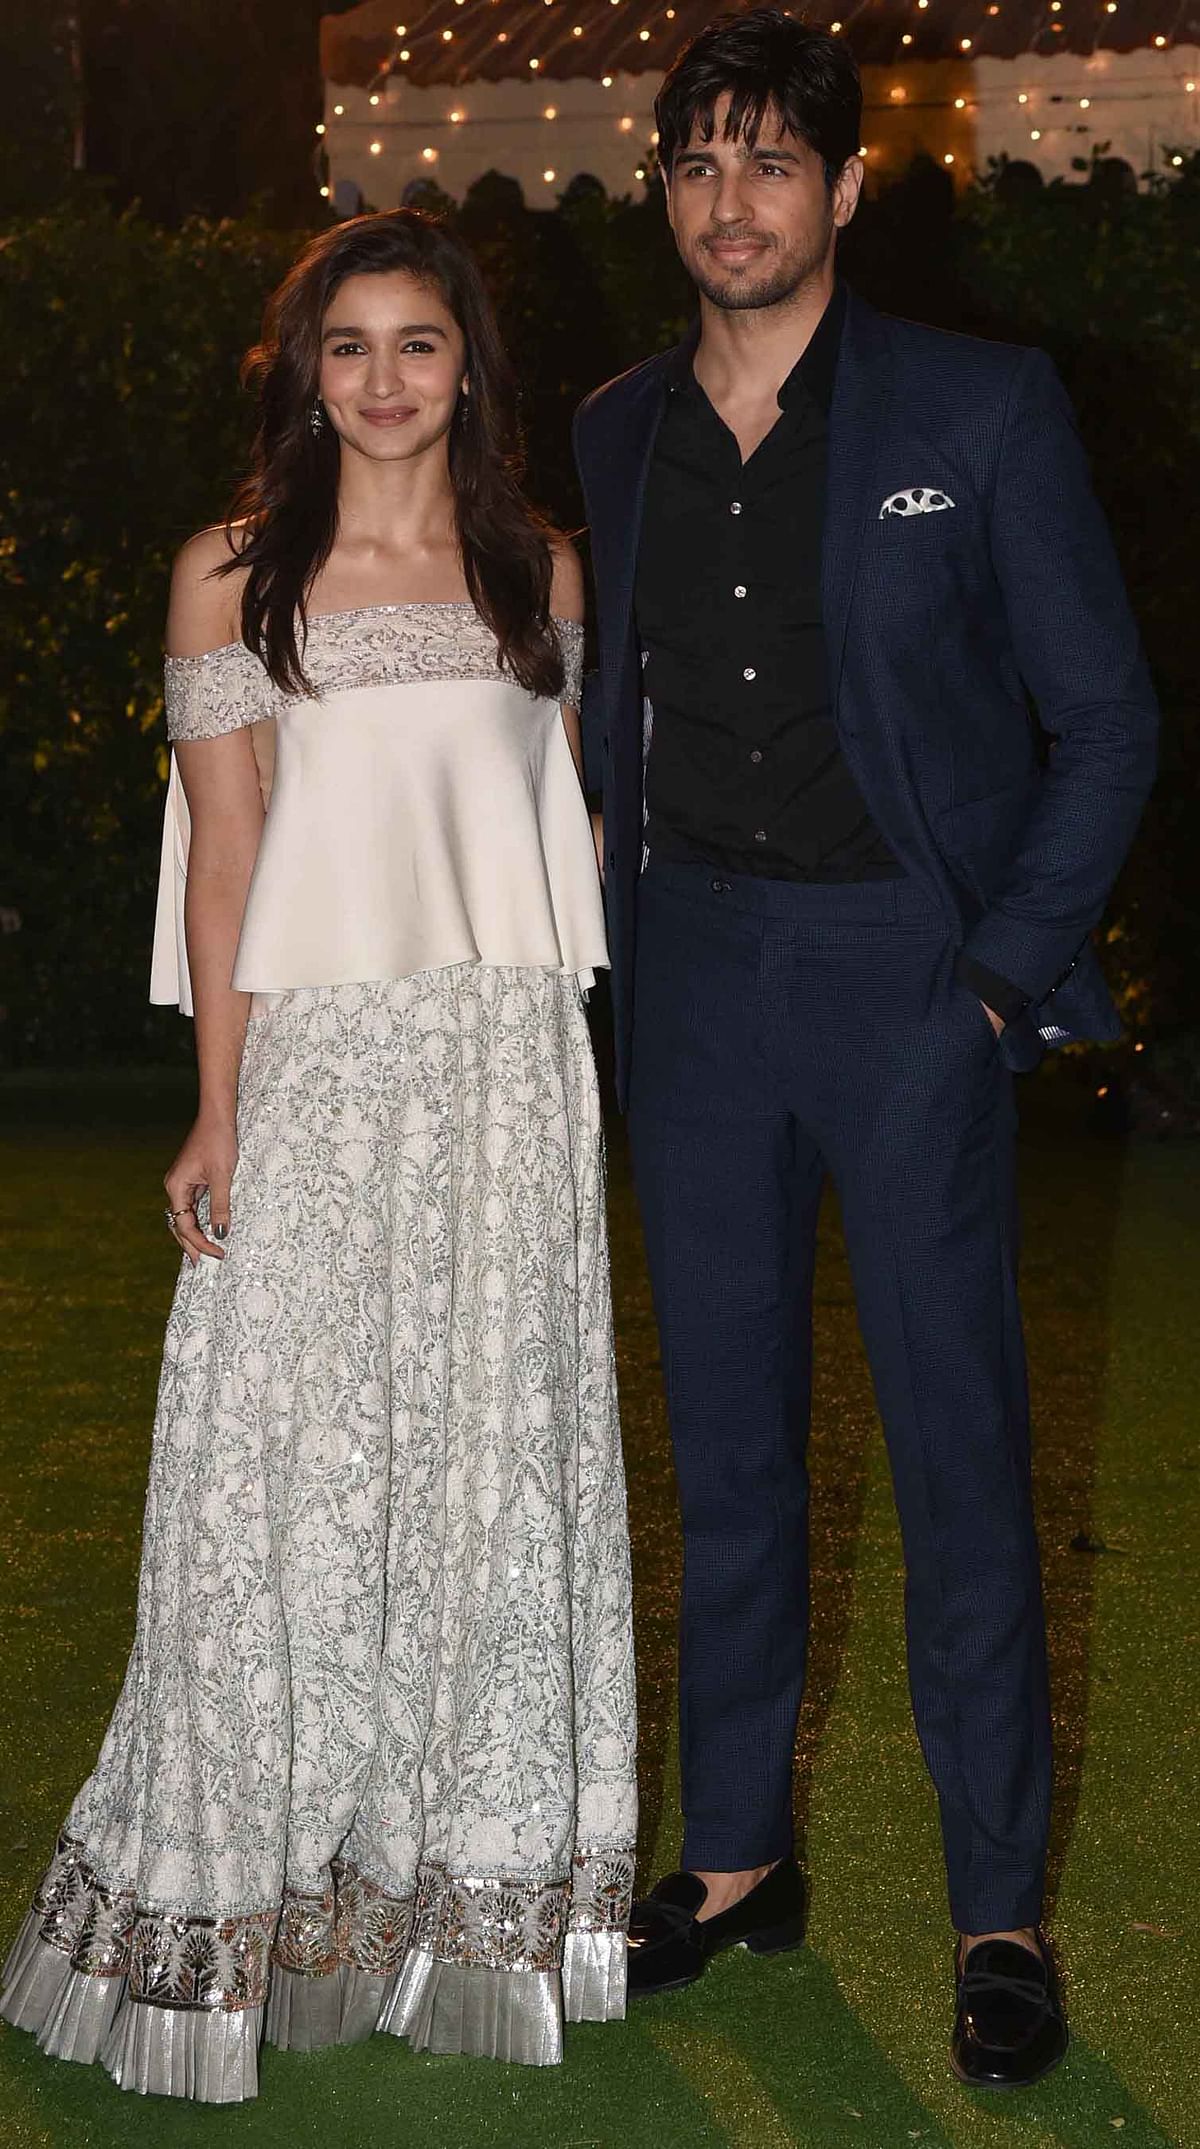 Priety Zinta, Shahid Kapoor and Sonakshi Sinha were also present at the wedding reception.